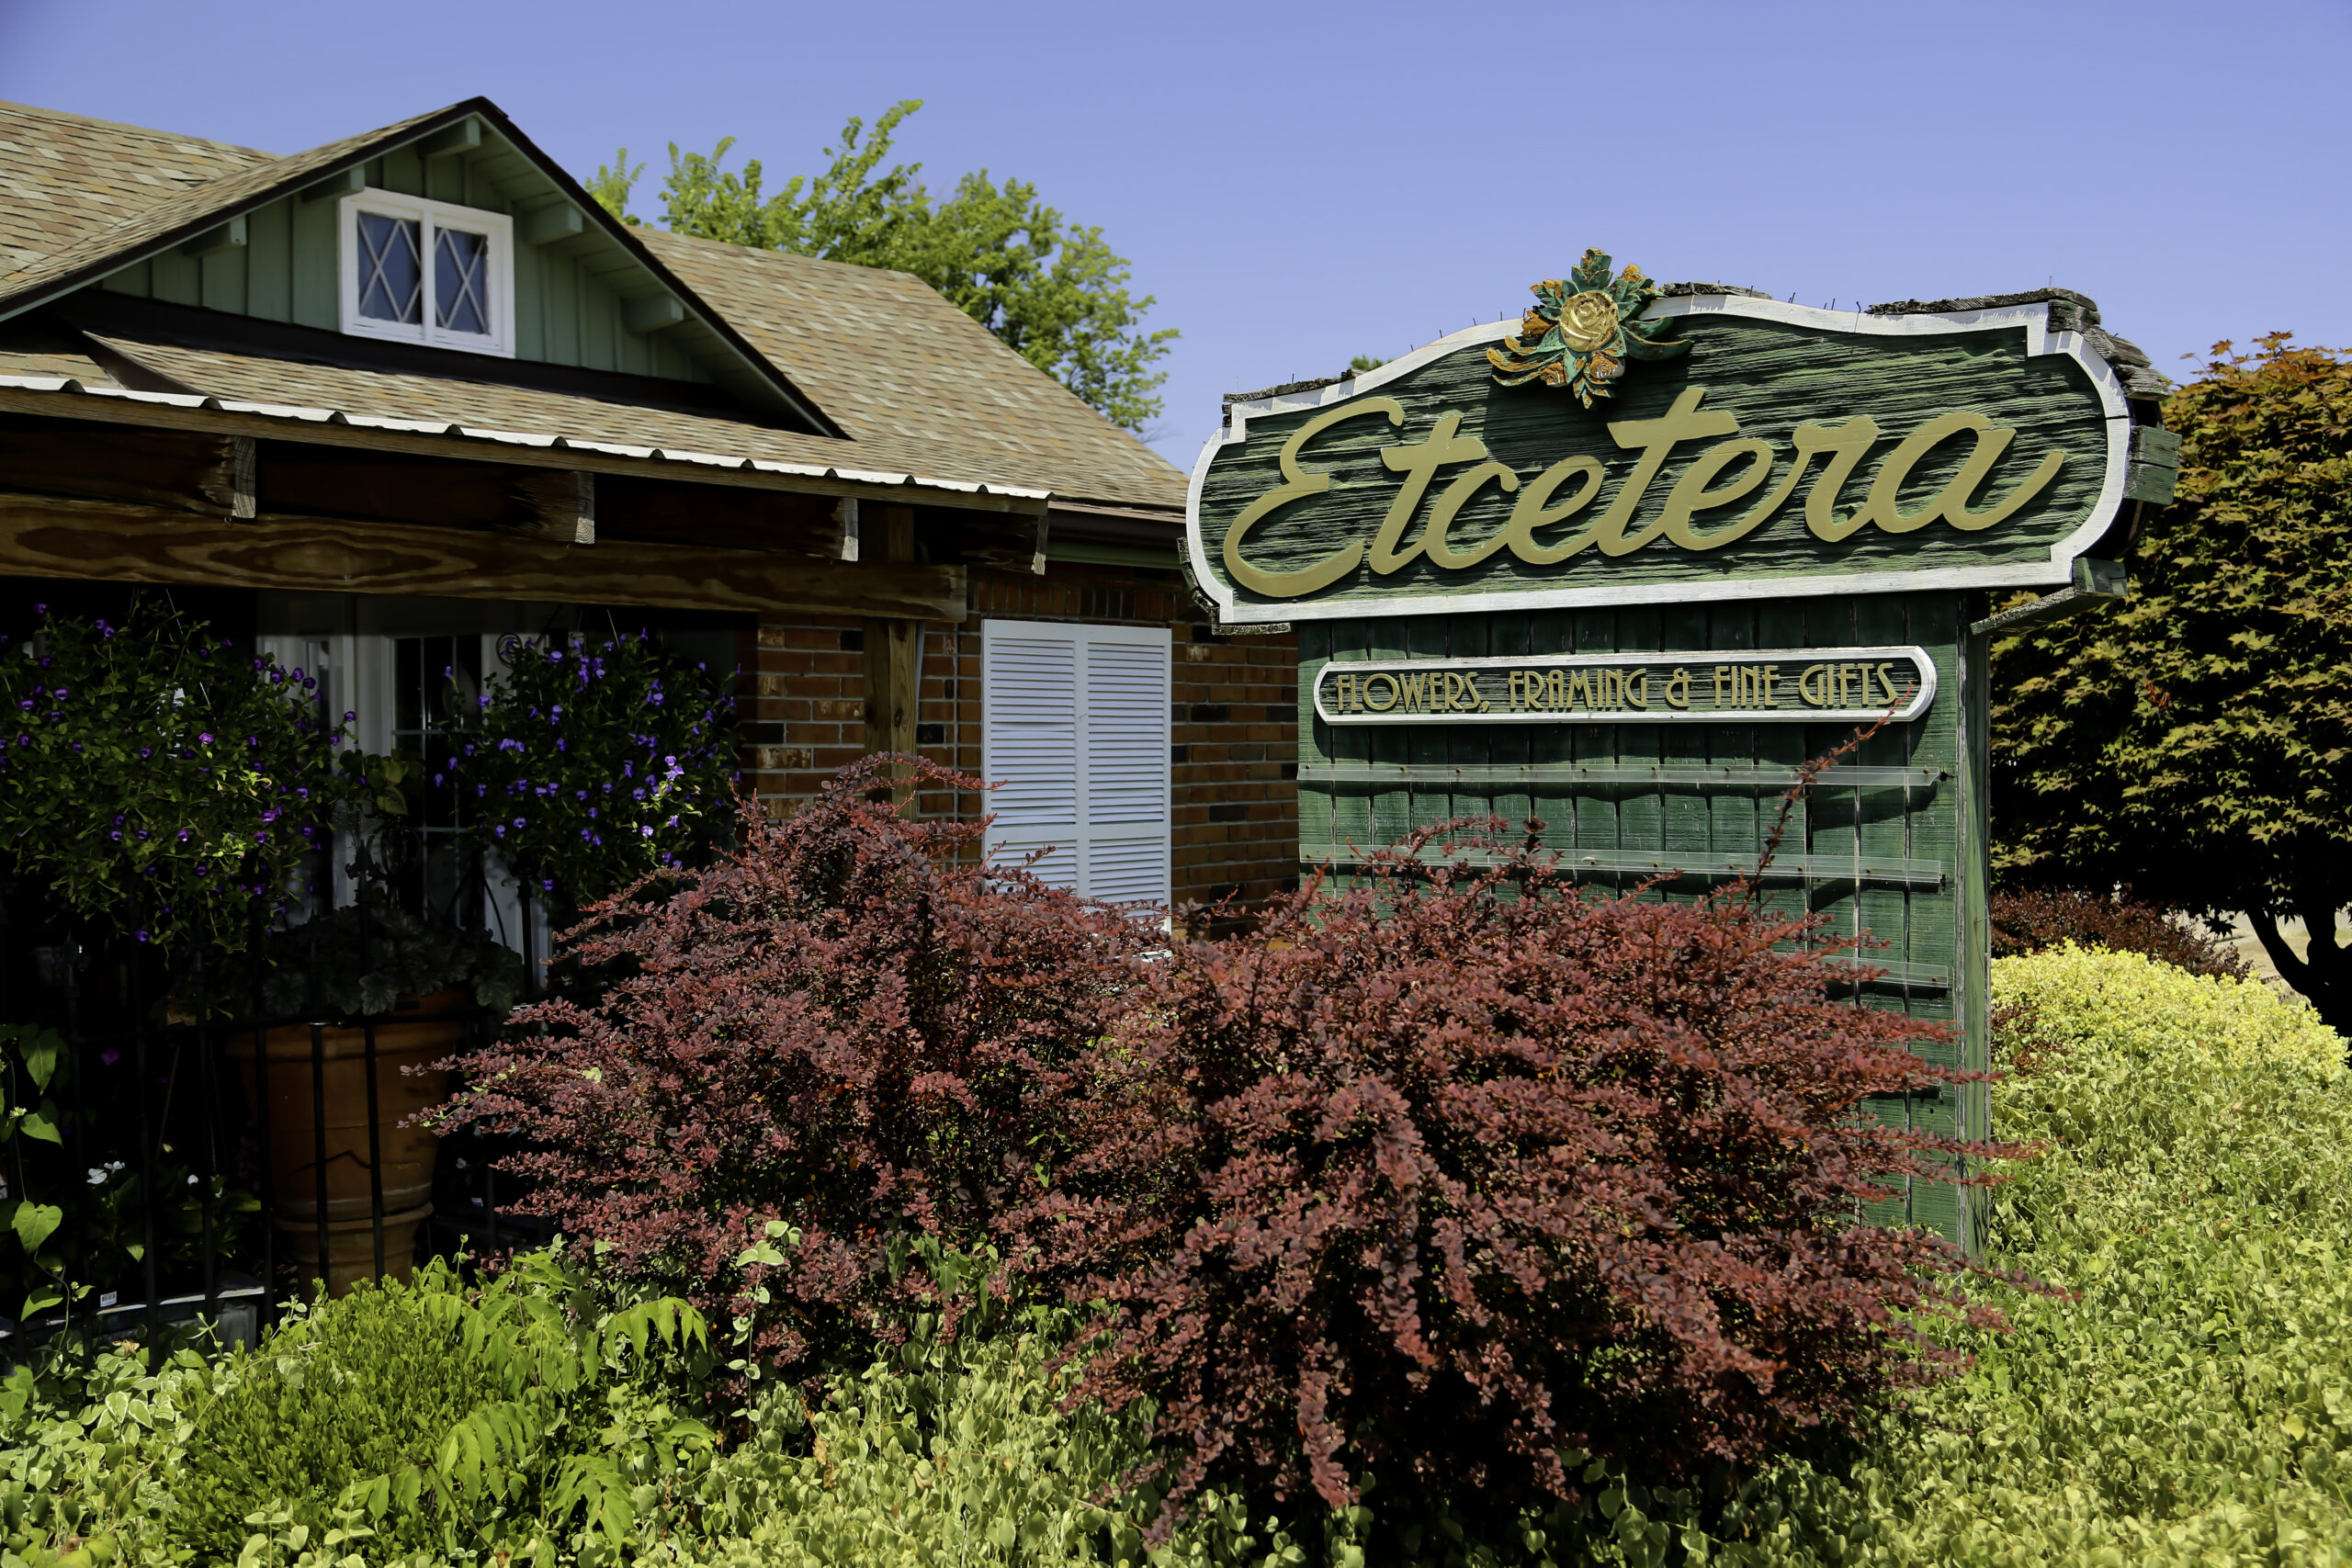 etcetera-flowers-gifts-gourmet-store-marion-illinois